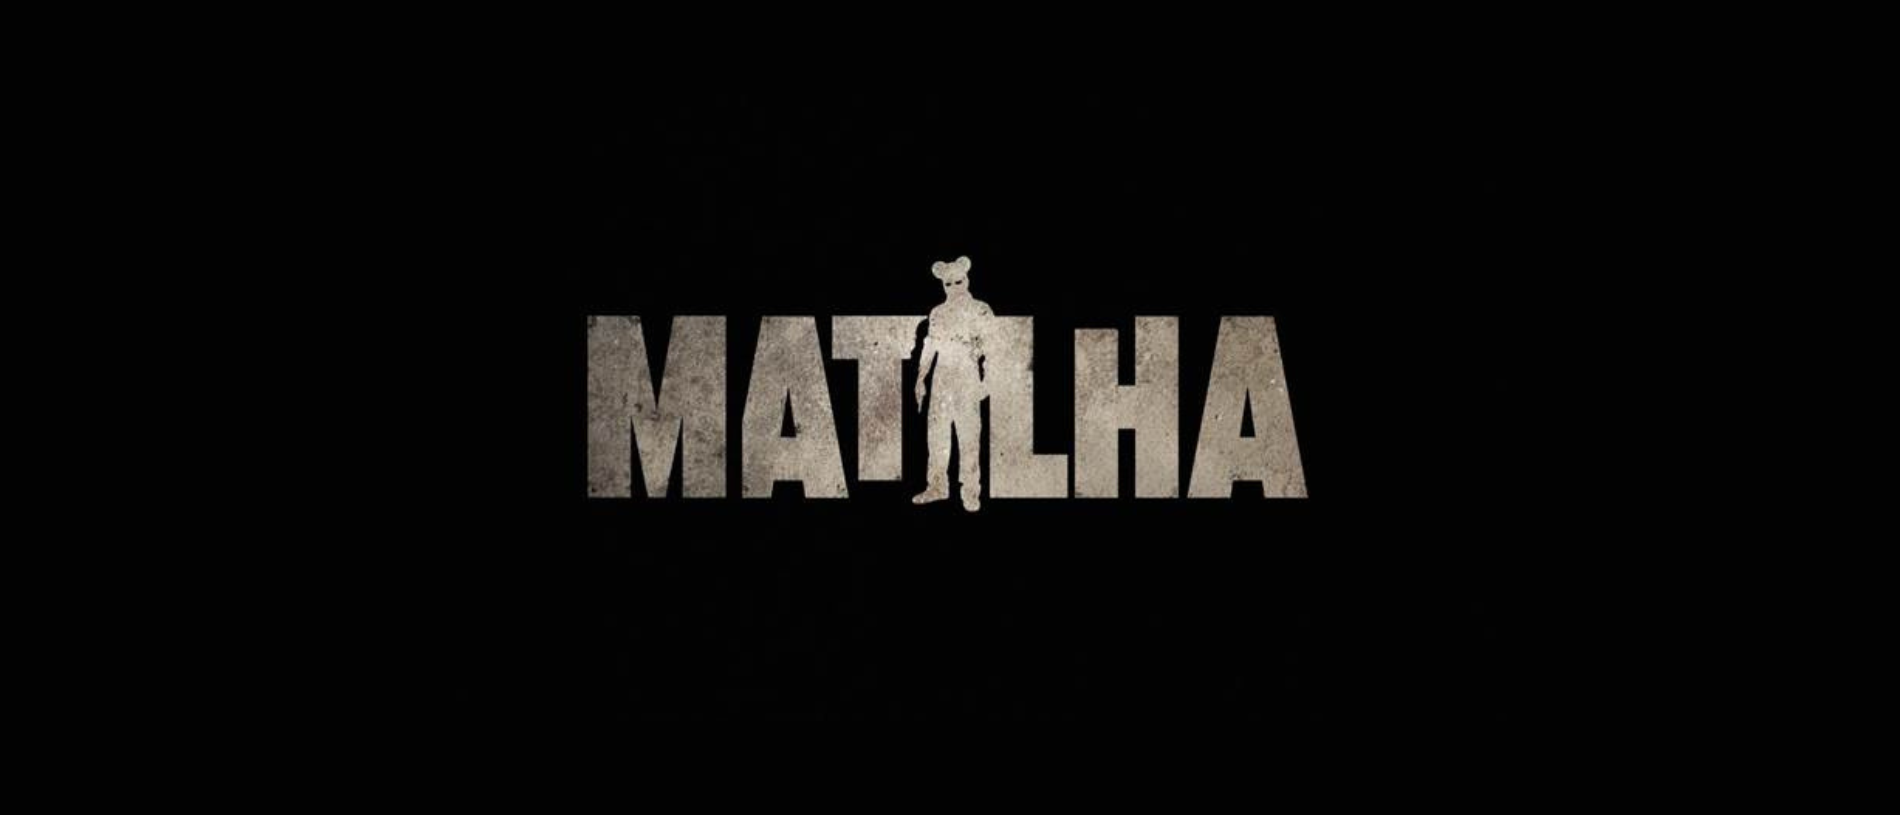 You are currently viewing “Matilha” seleccionada para a Berlinale Series Market Selects